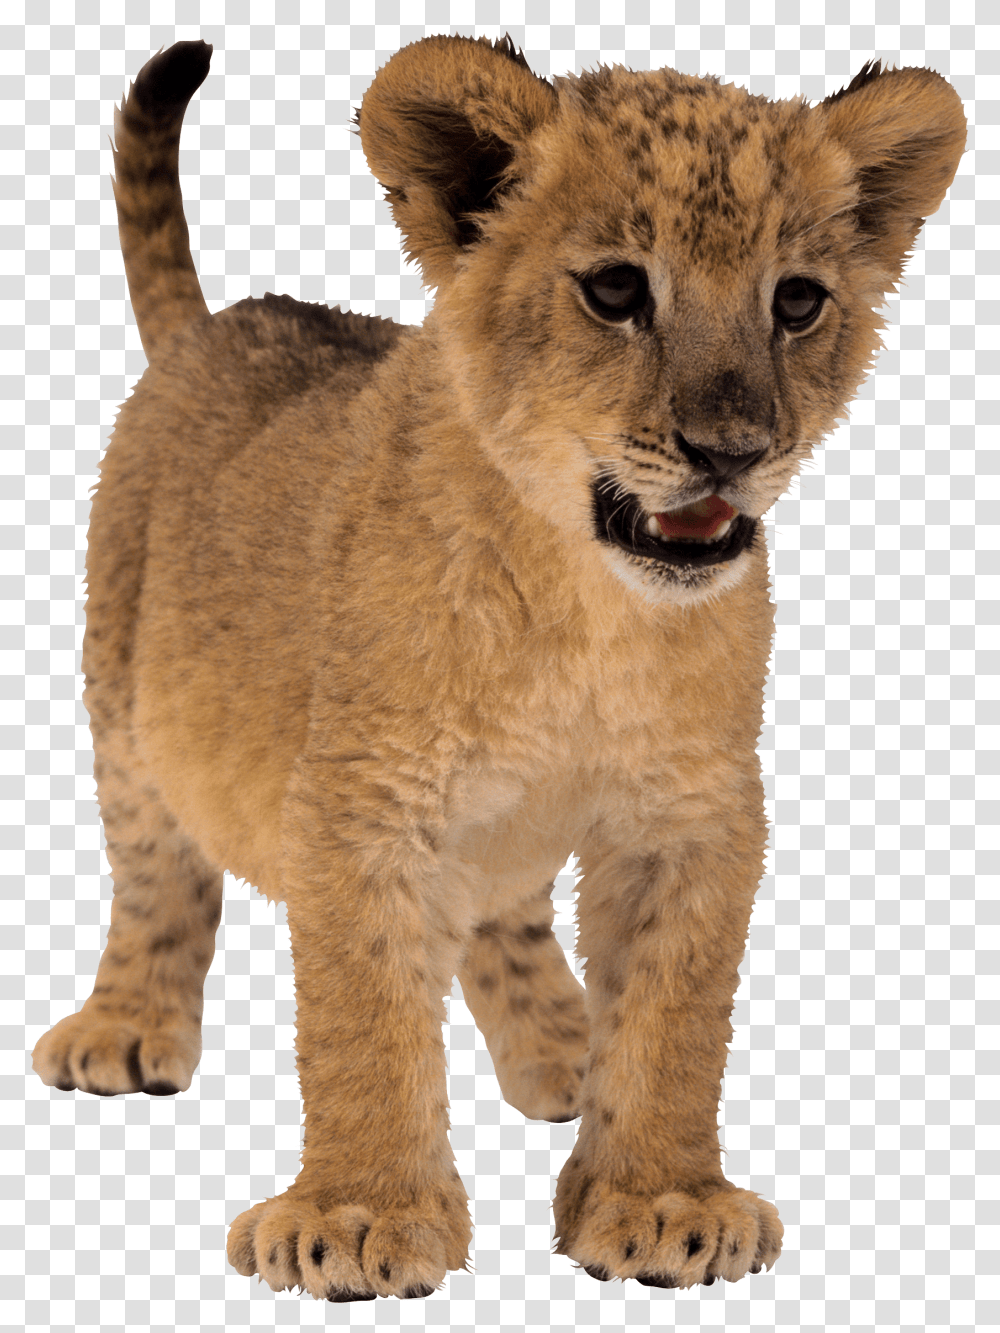 Download Small Lion Image Image Pngimg Small Lion, Wildlife, Mammal, Animal, Panther Transparent Png